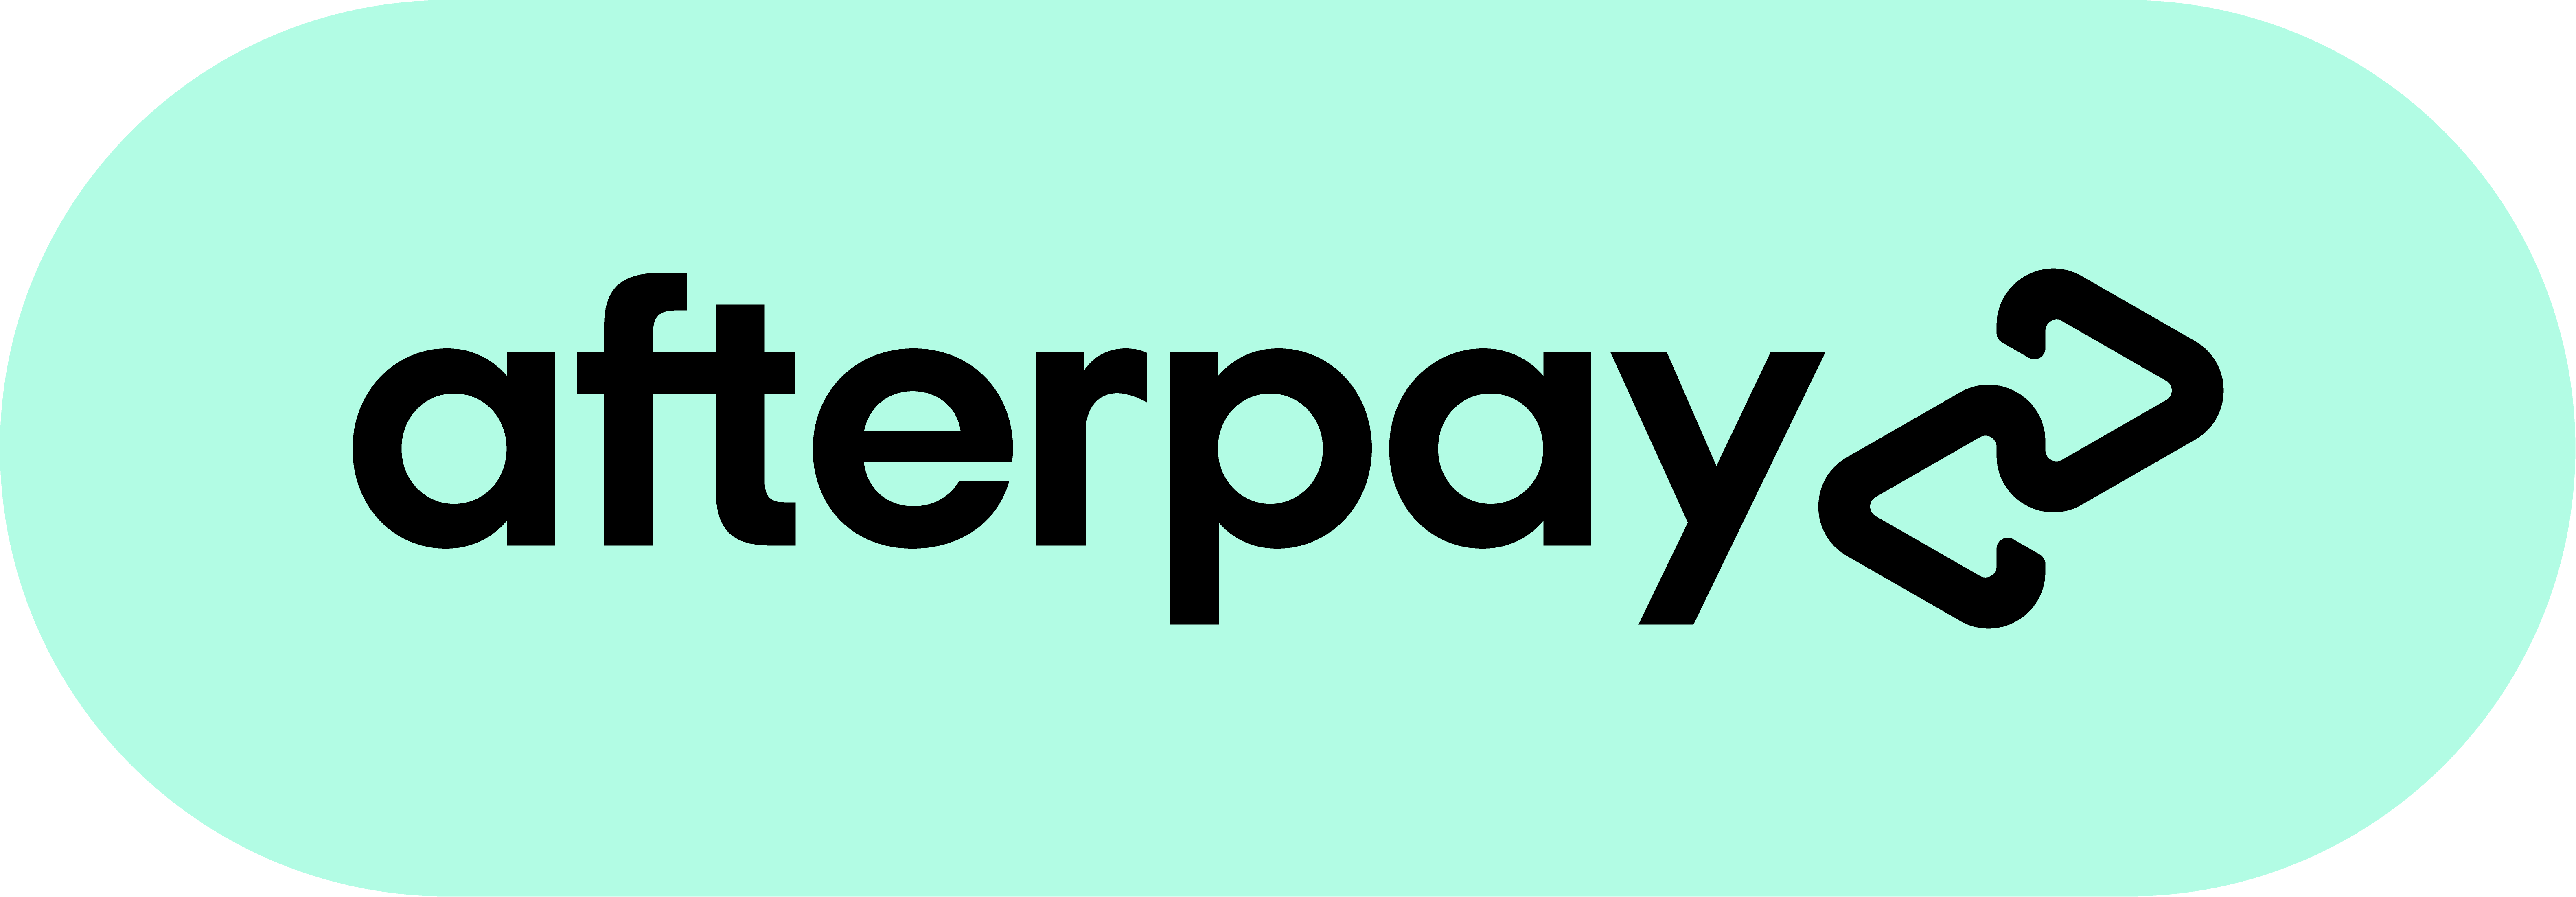 Word 'afterpay' on a light green solid background with rounded edges